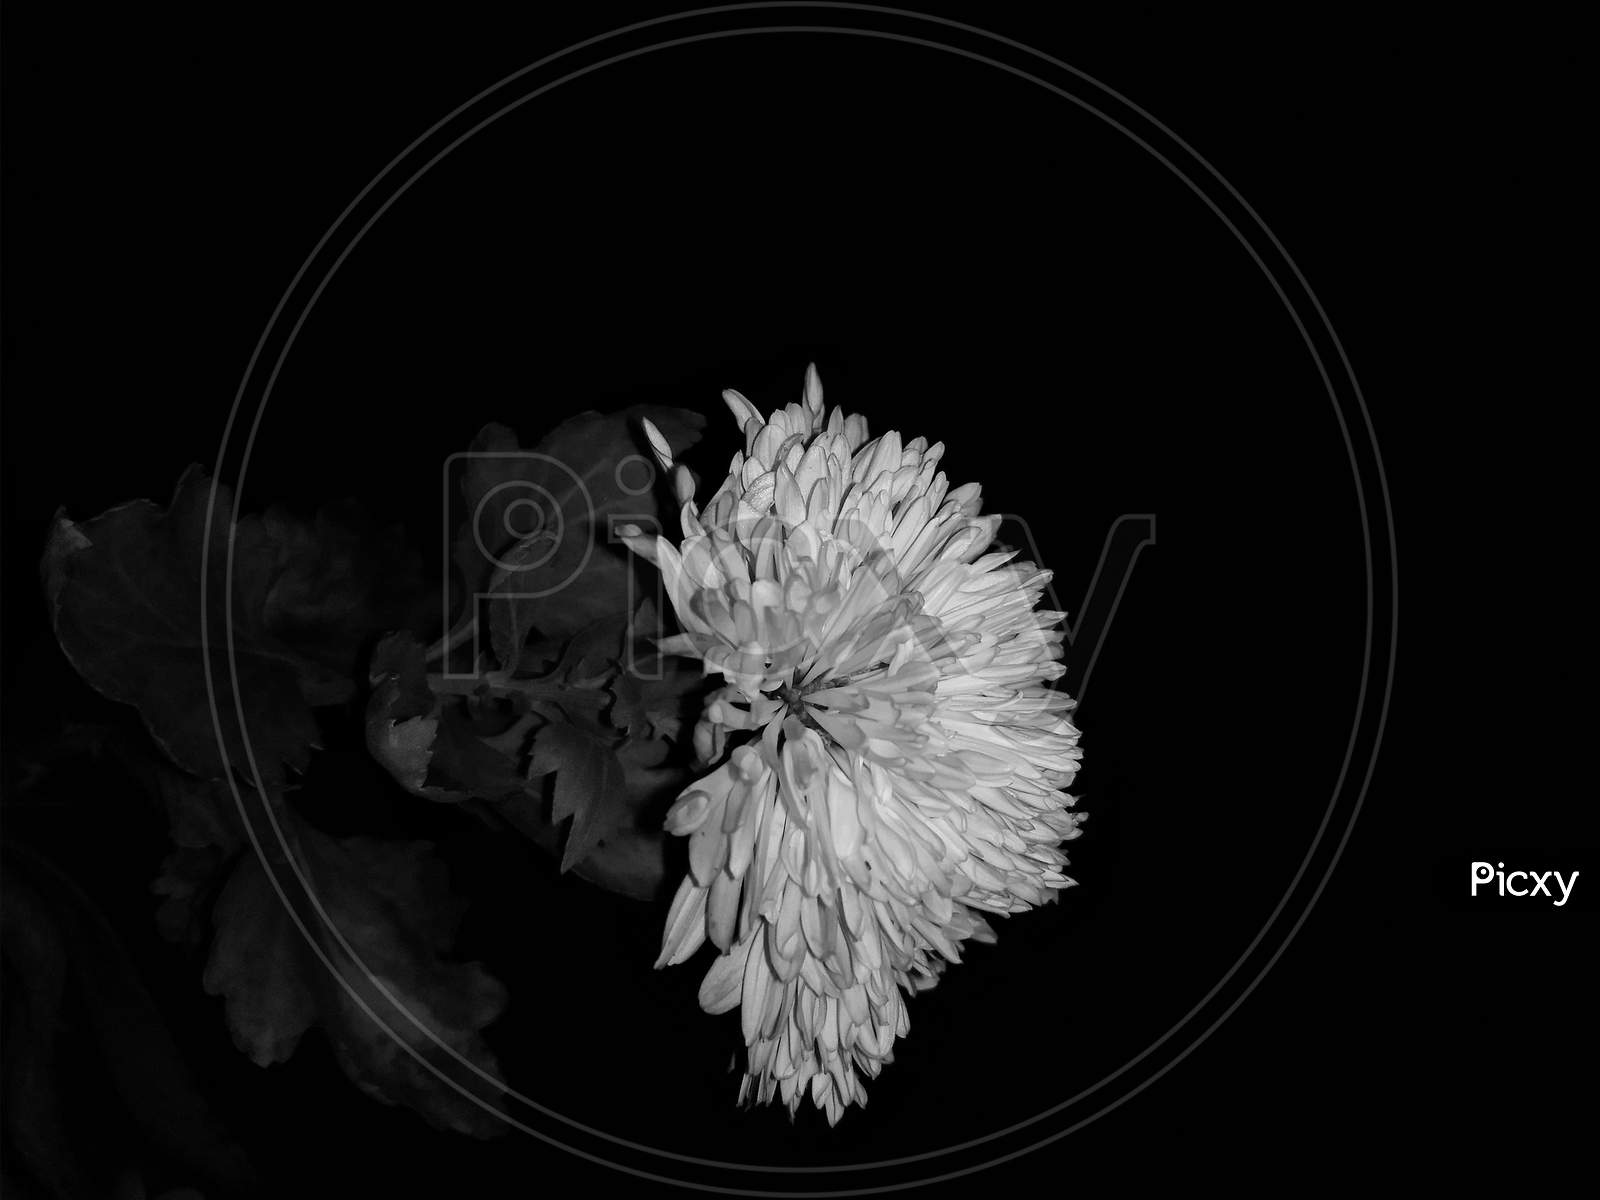 Flower Blooming On Plant With Dark Background